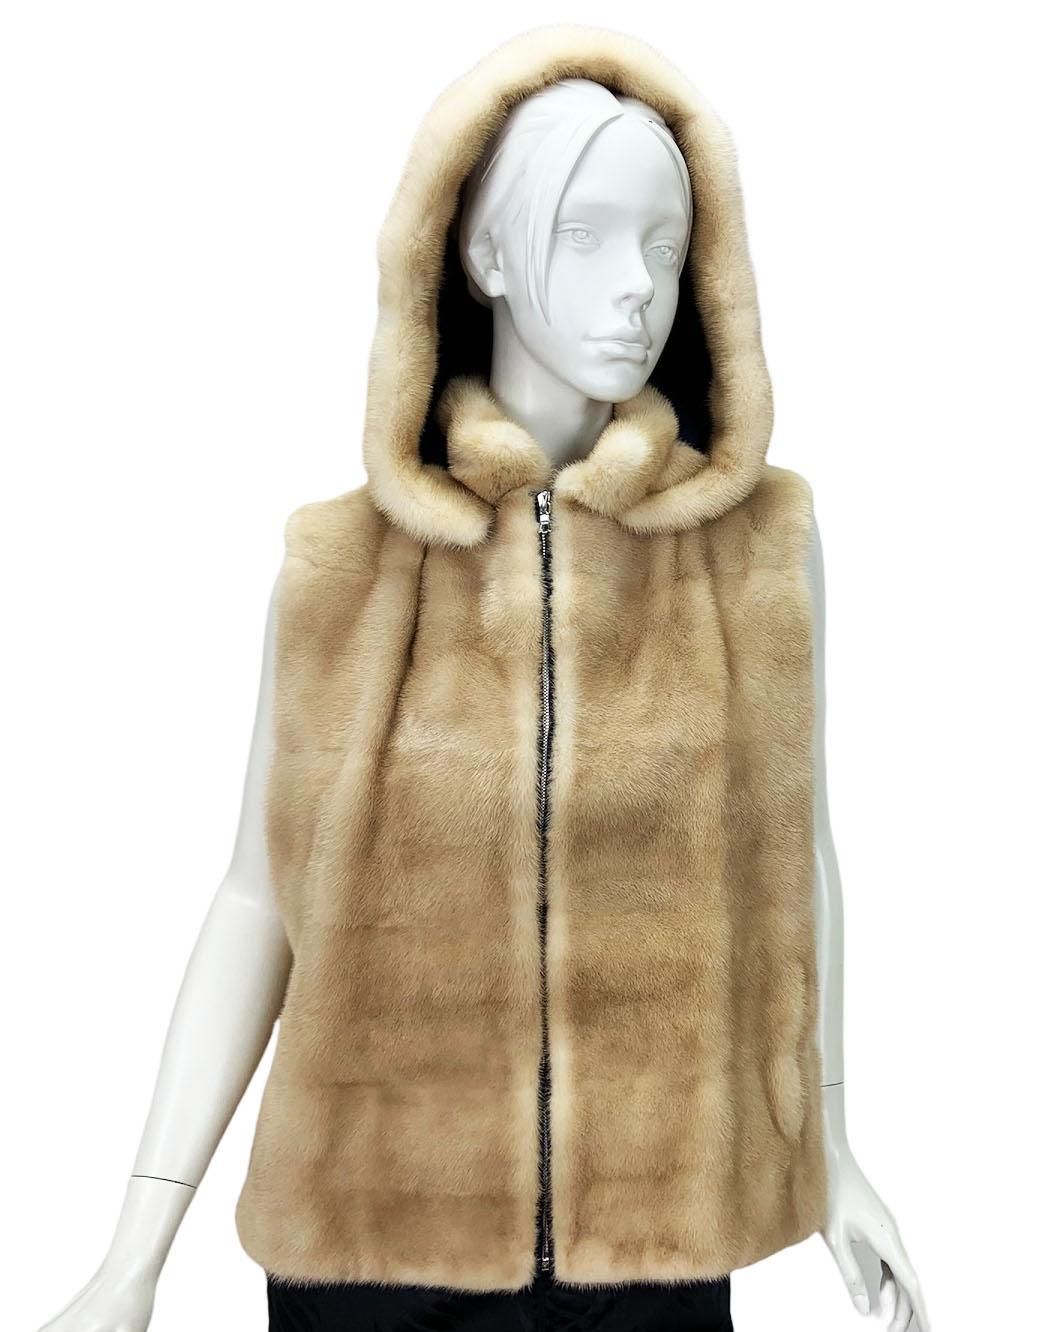 New Oscar De La Renta Palomino Mink Hooded Vest
Designer size - M
100% Real Mink ( Fur Origin USA) , Detachable Hood, Two Side Pockets, Fully Lined in Silk,  Zipper Closure.
Measurements: Length - 24 inches, Bust - 40 inches.
Made in USA.
New with